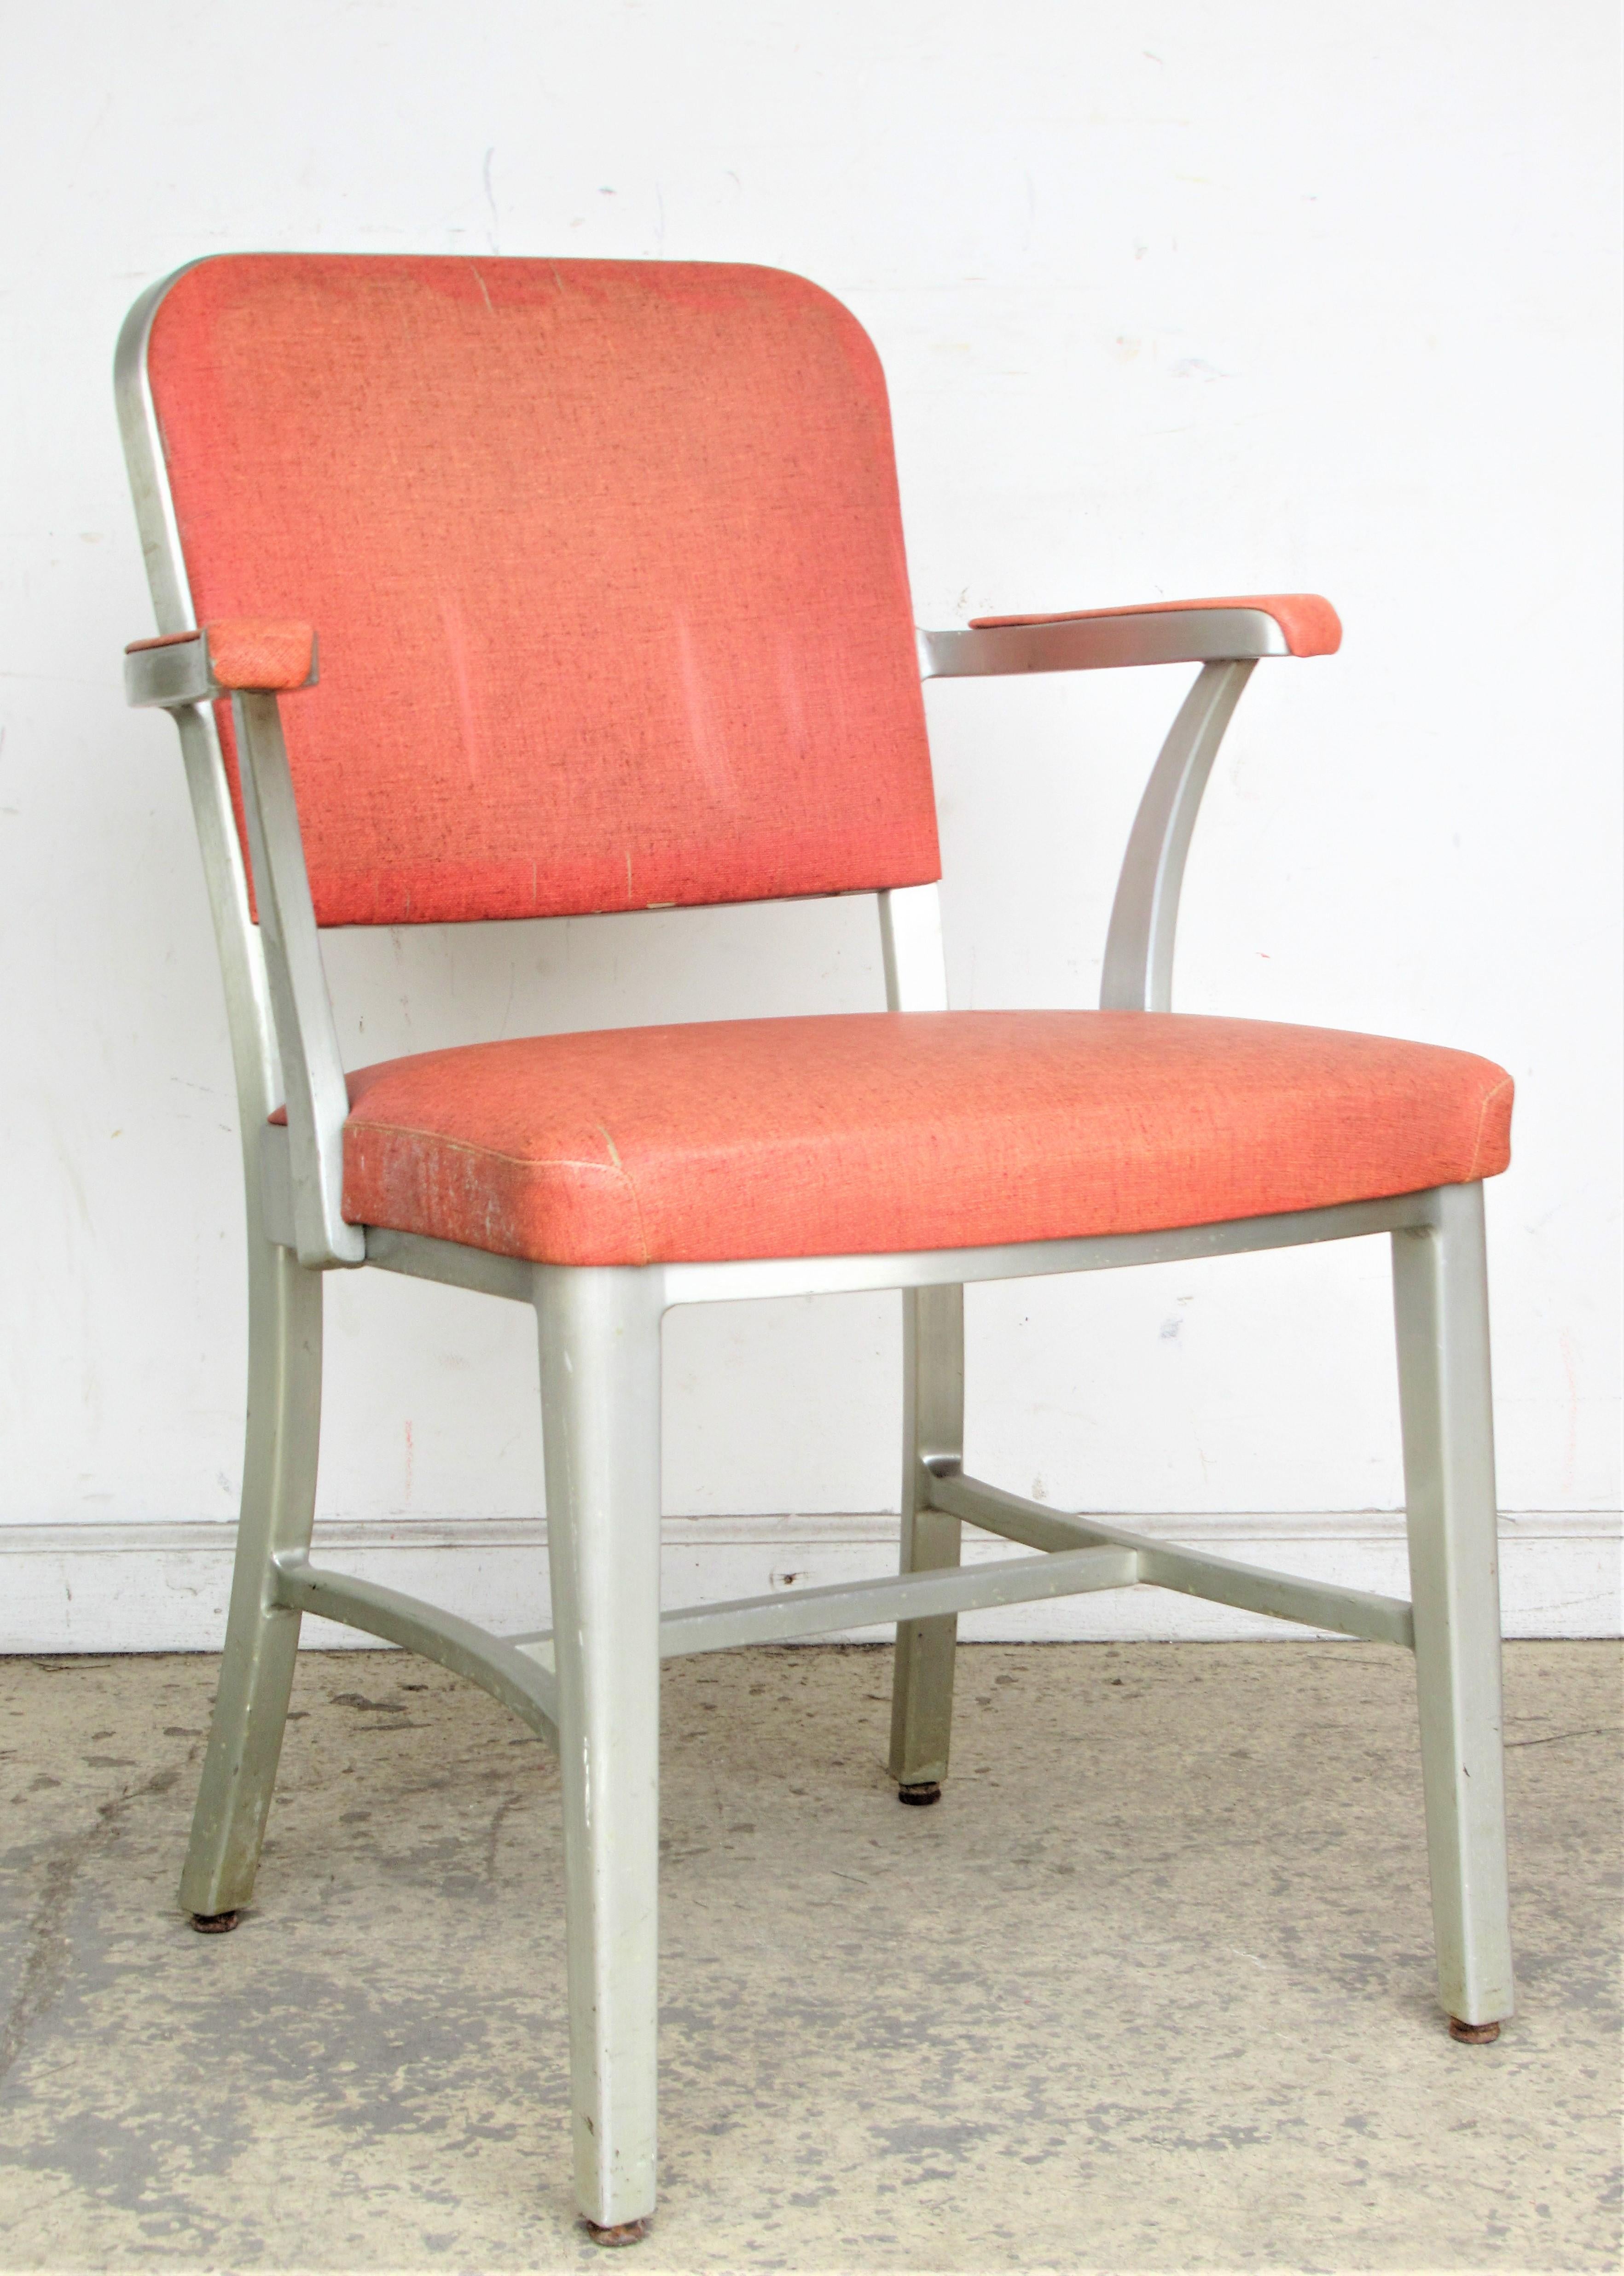 General Fireproofing Company Good Form Industrial Aluminum Armchair 2